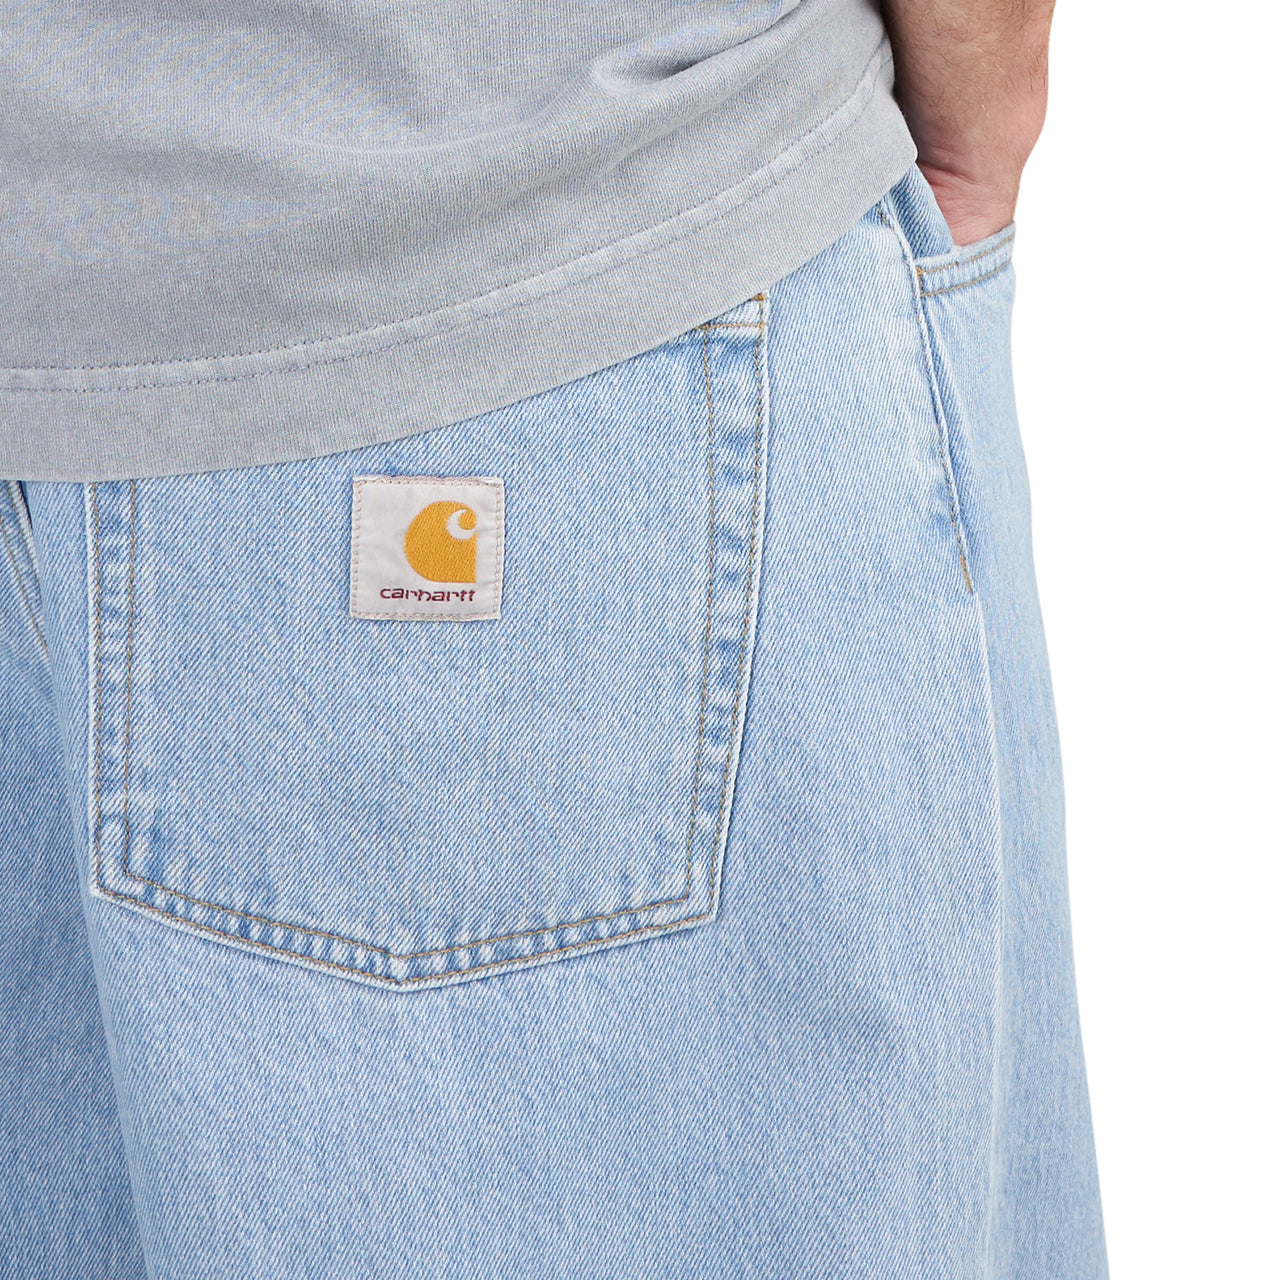 Carhartt WIP BRANDON PANT - Relaxed fit jeans - blue stone  bleached/bleached denim 